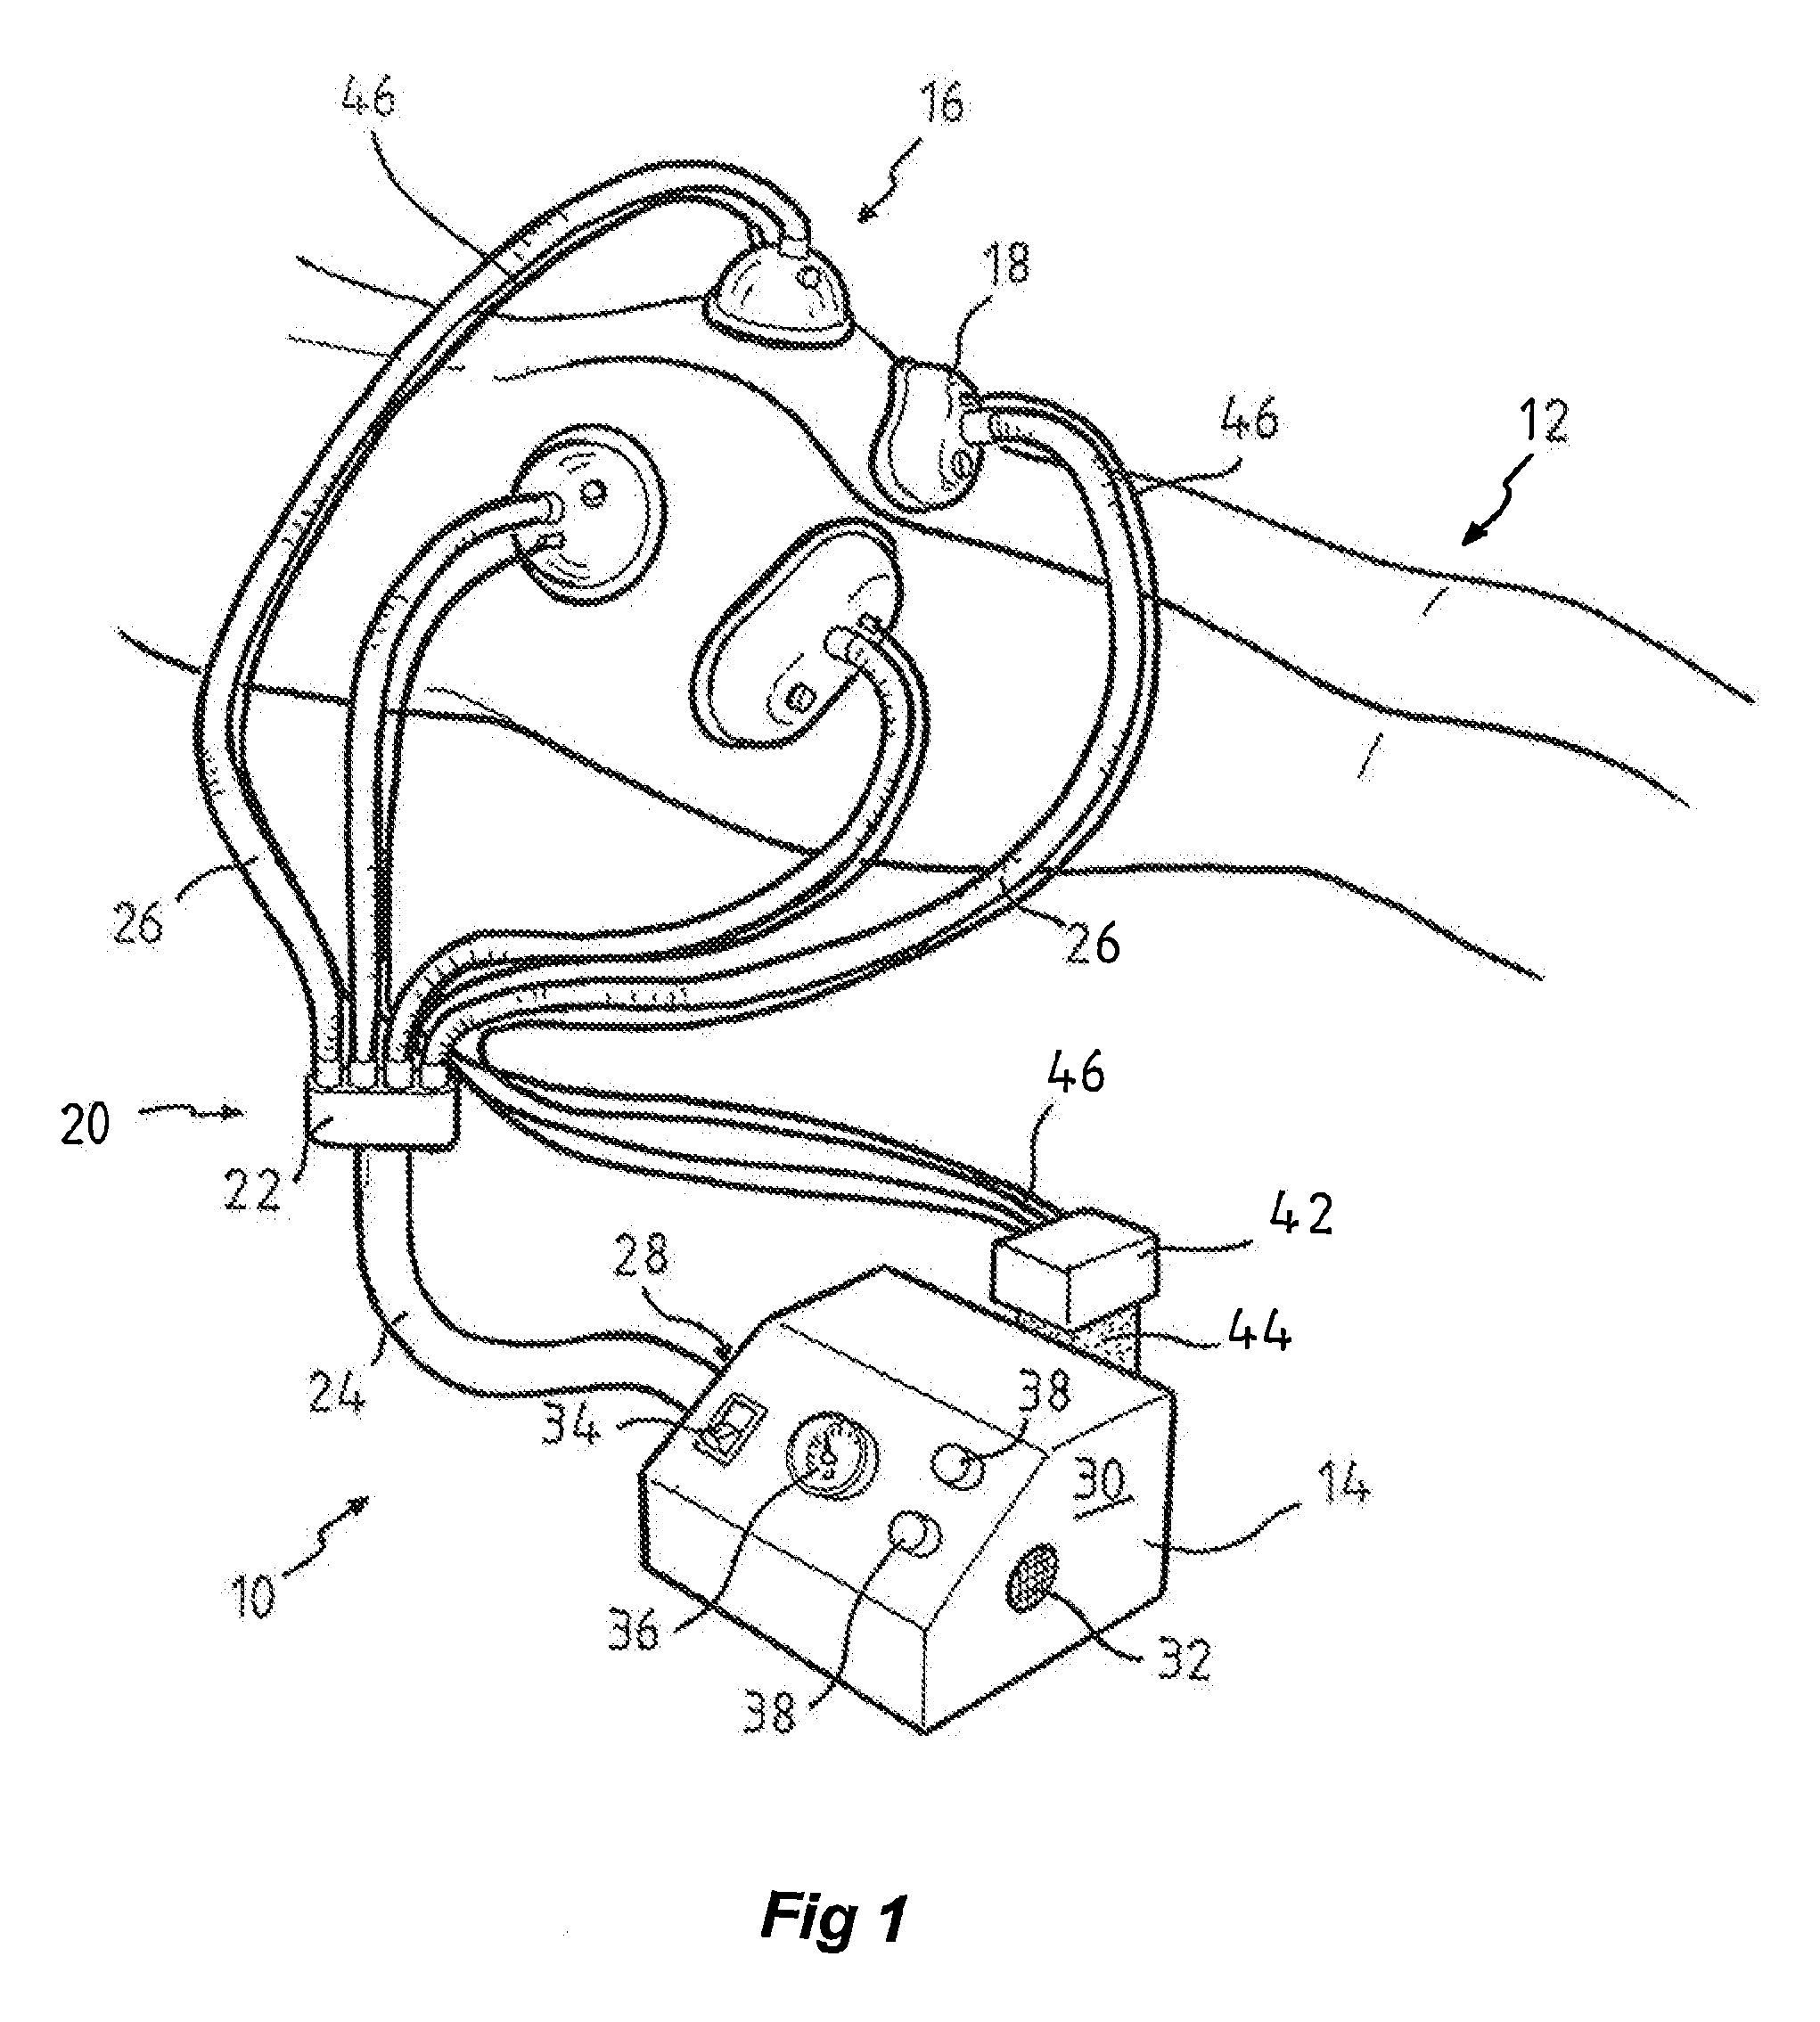 Apparatus and method of body contouring and skin conditioning